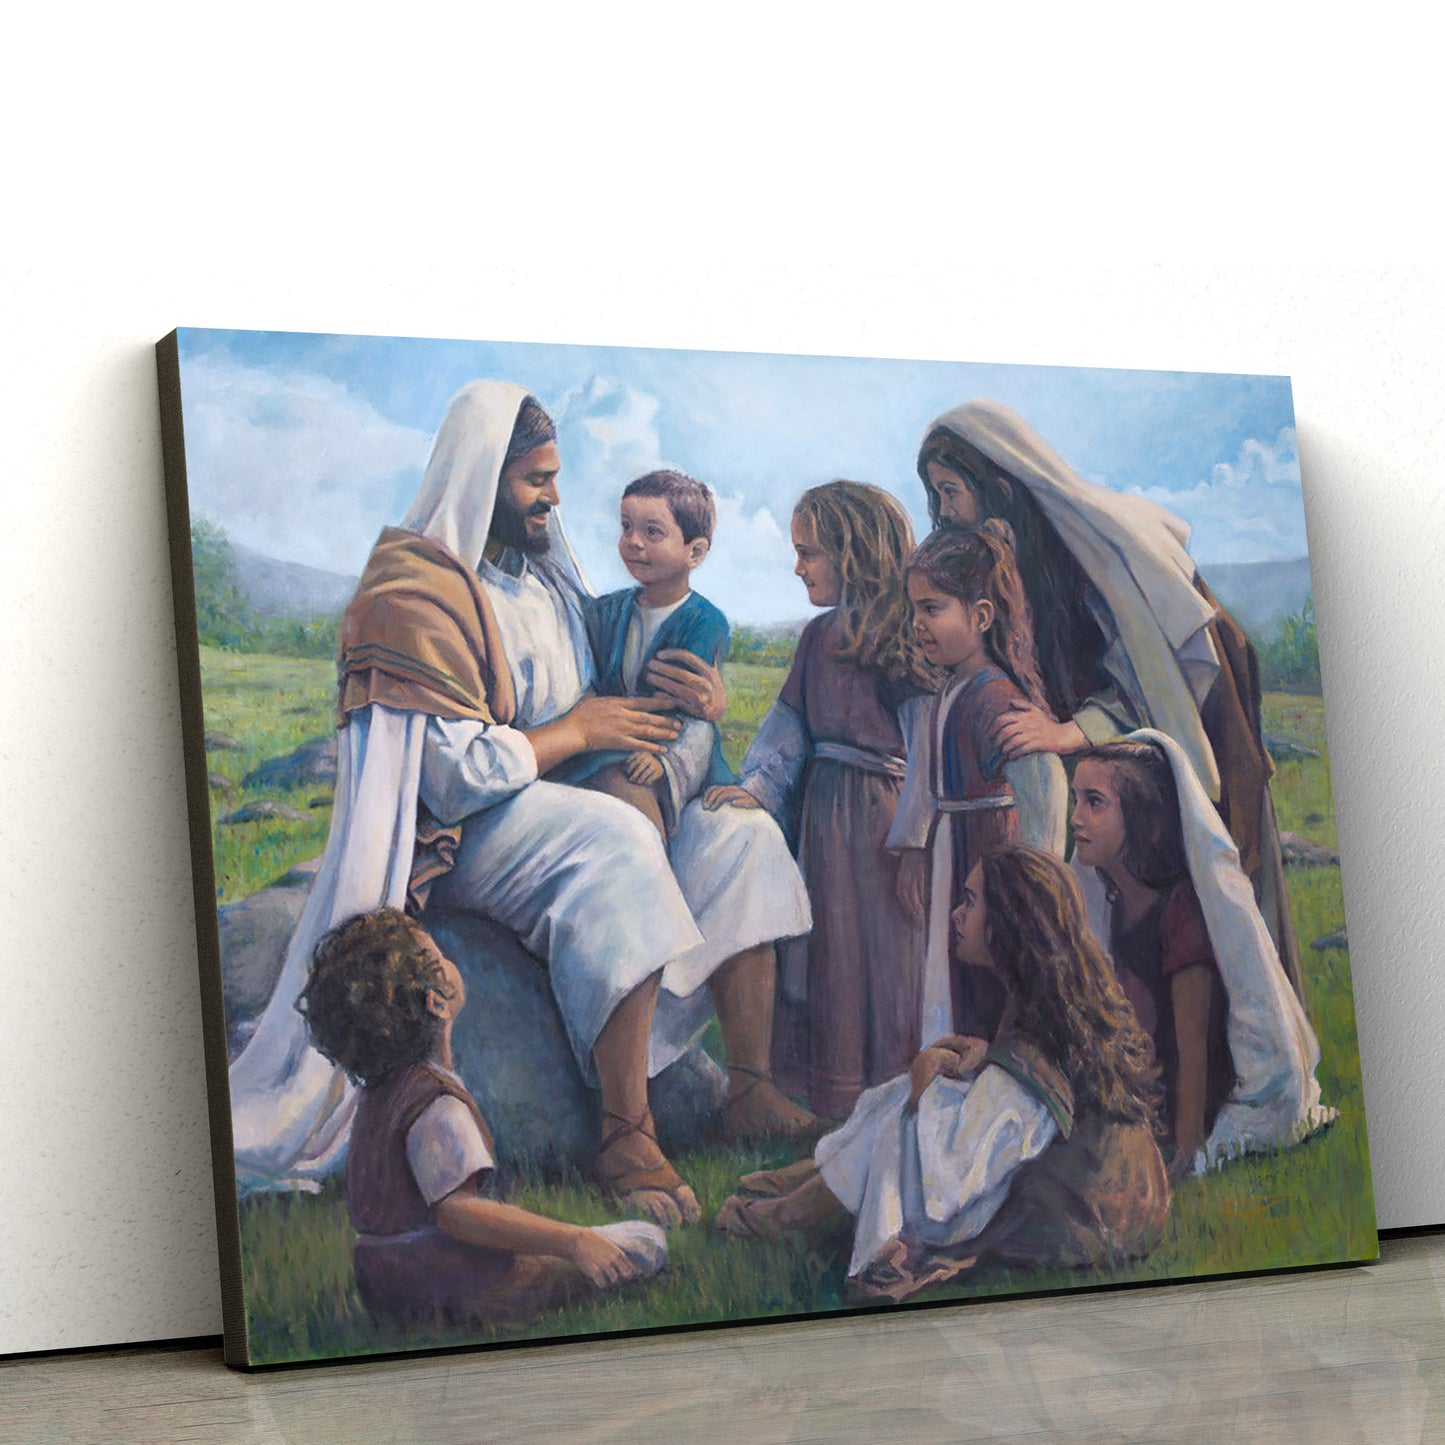 All Eyes On Jesus Canvas Picture - Jesus Canvas Wall Art - Christian Wall Art